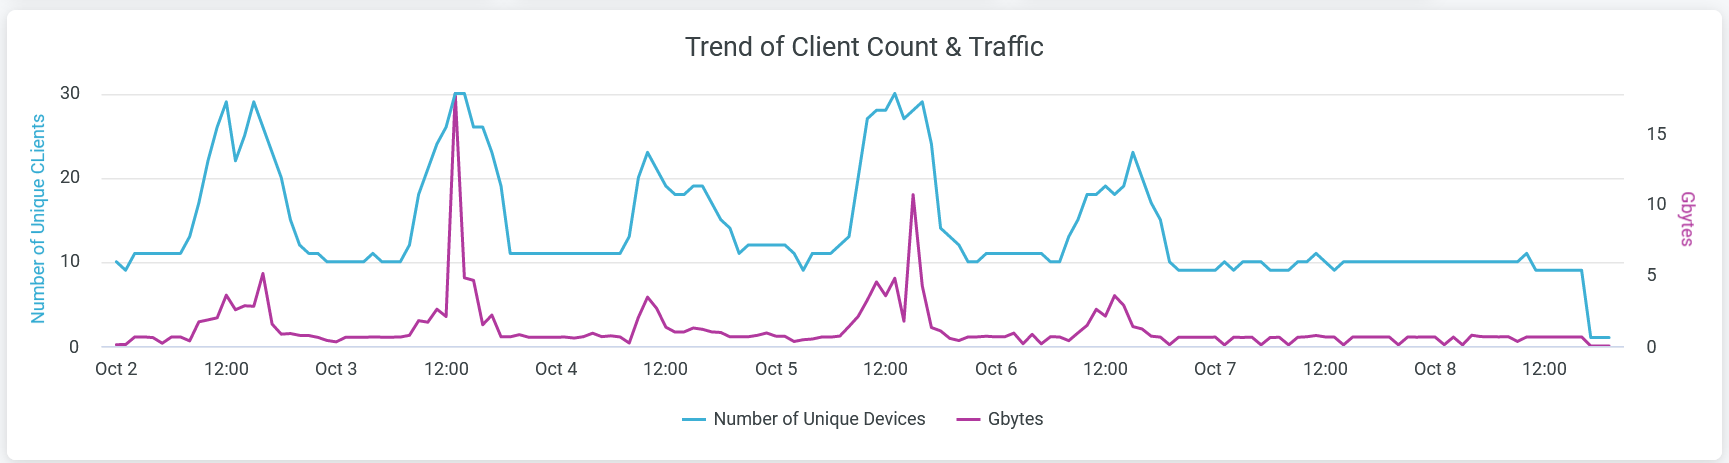 Trend of Client Count and Traffic